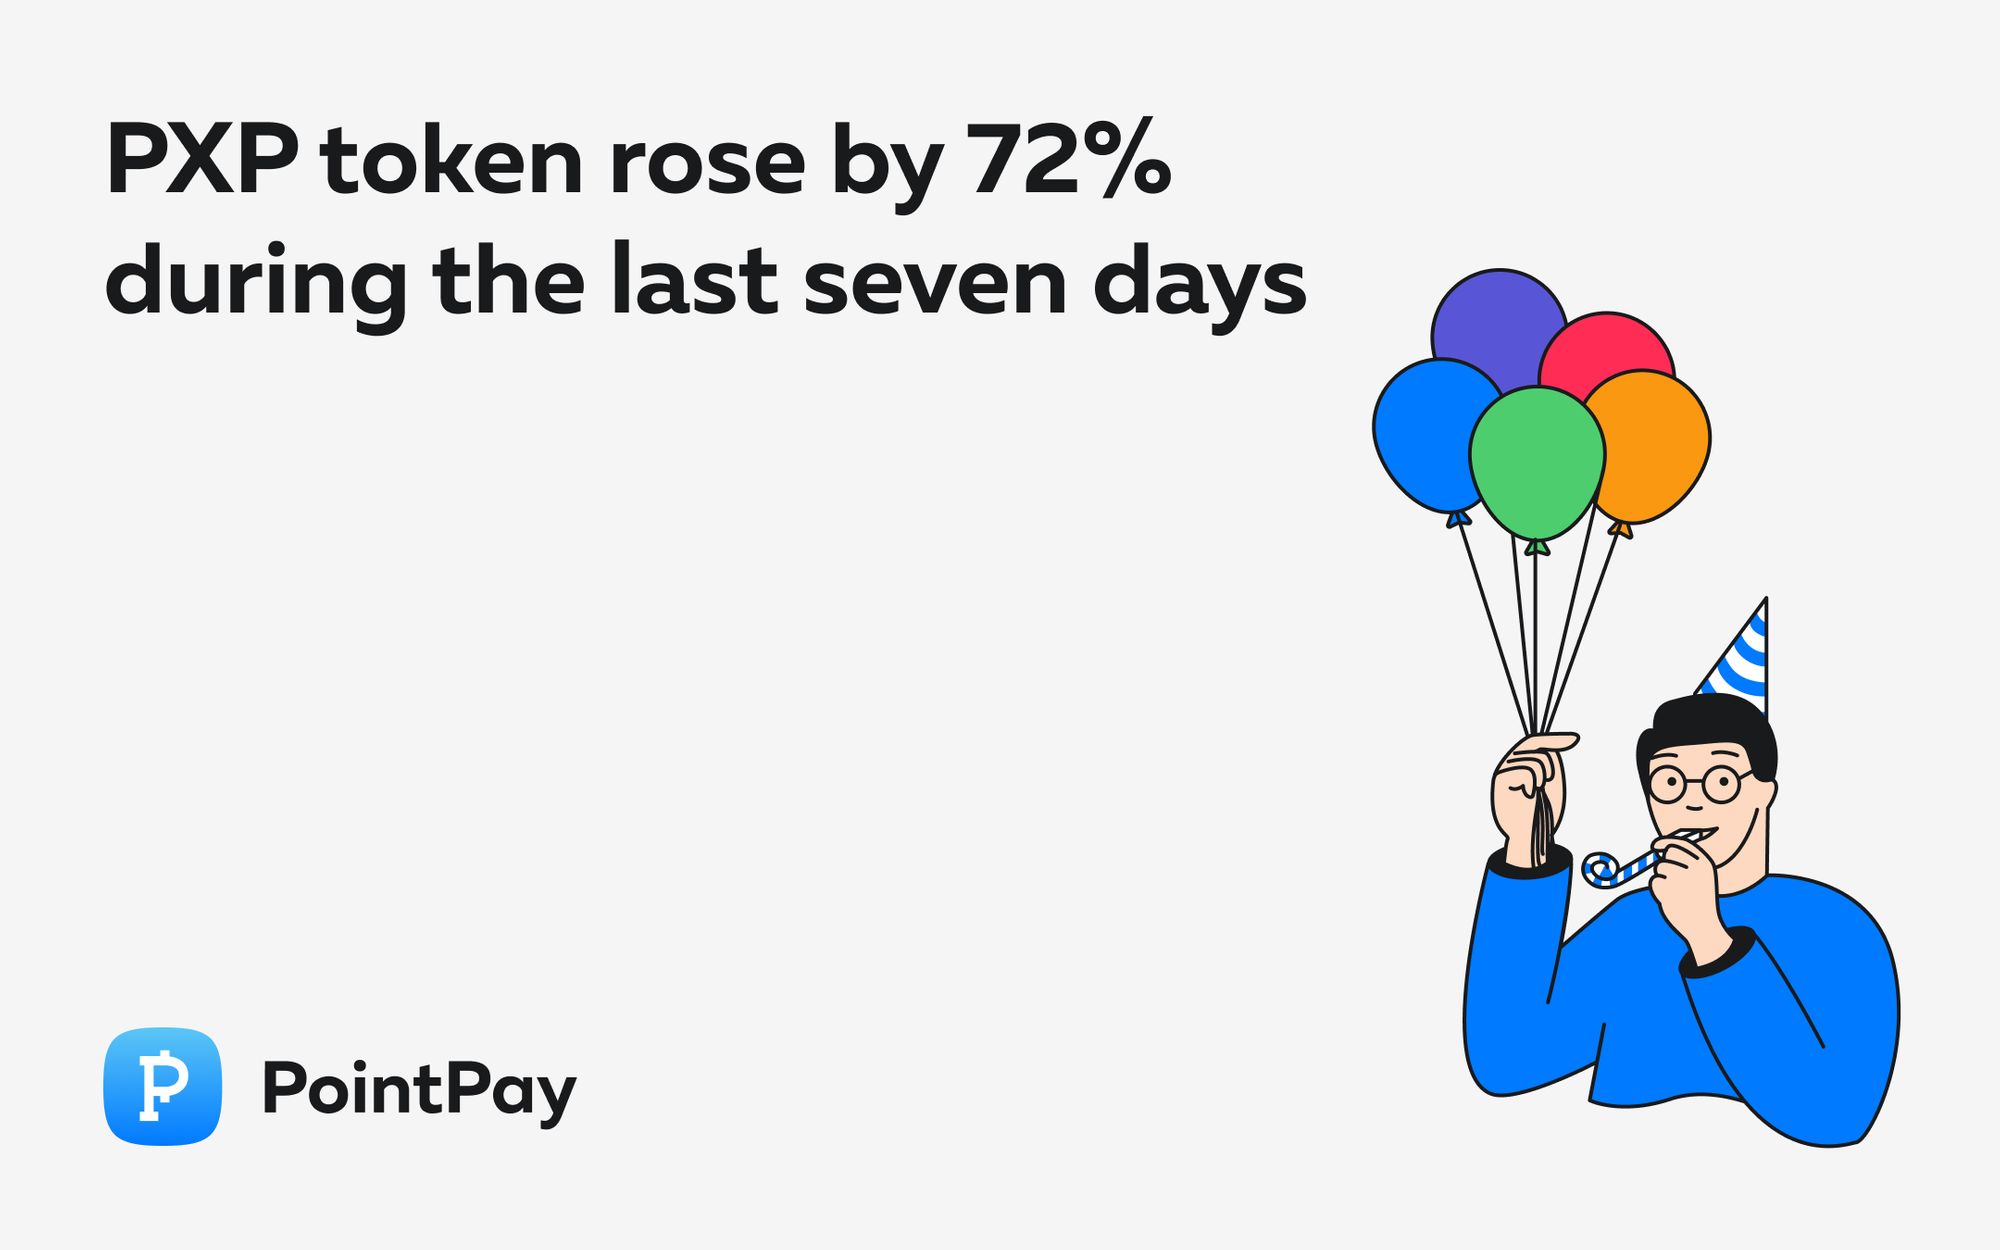 PXP token showed a remarkable growth of 72%